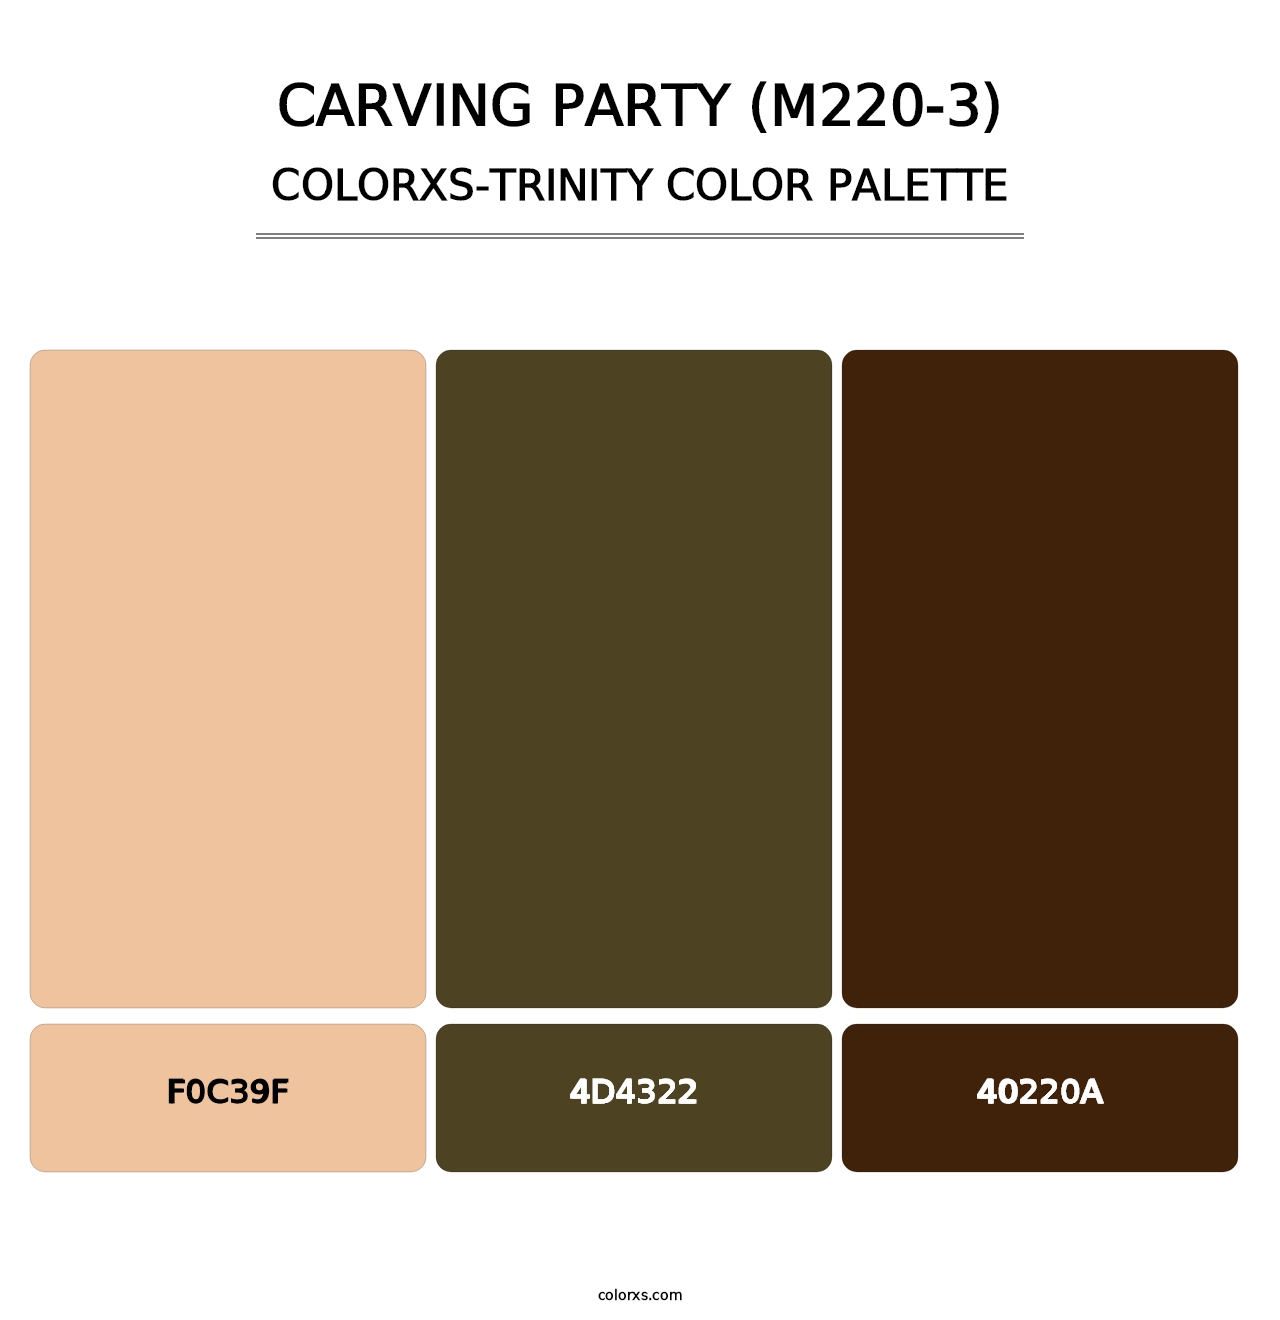 Carving Party (M220-3) - Colorxs Trinity Palette